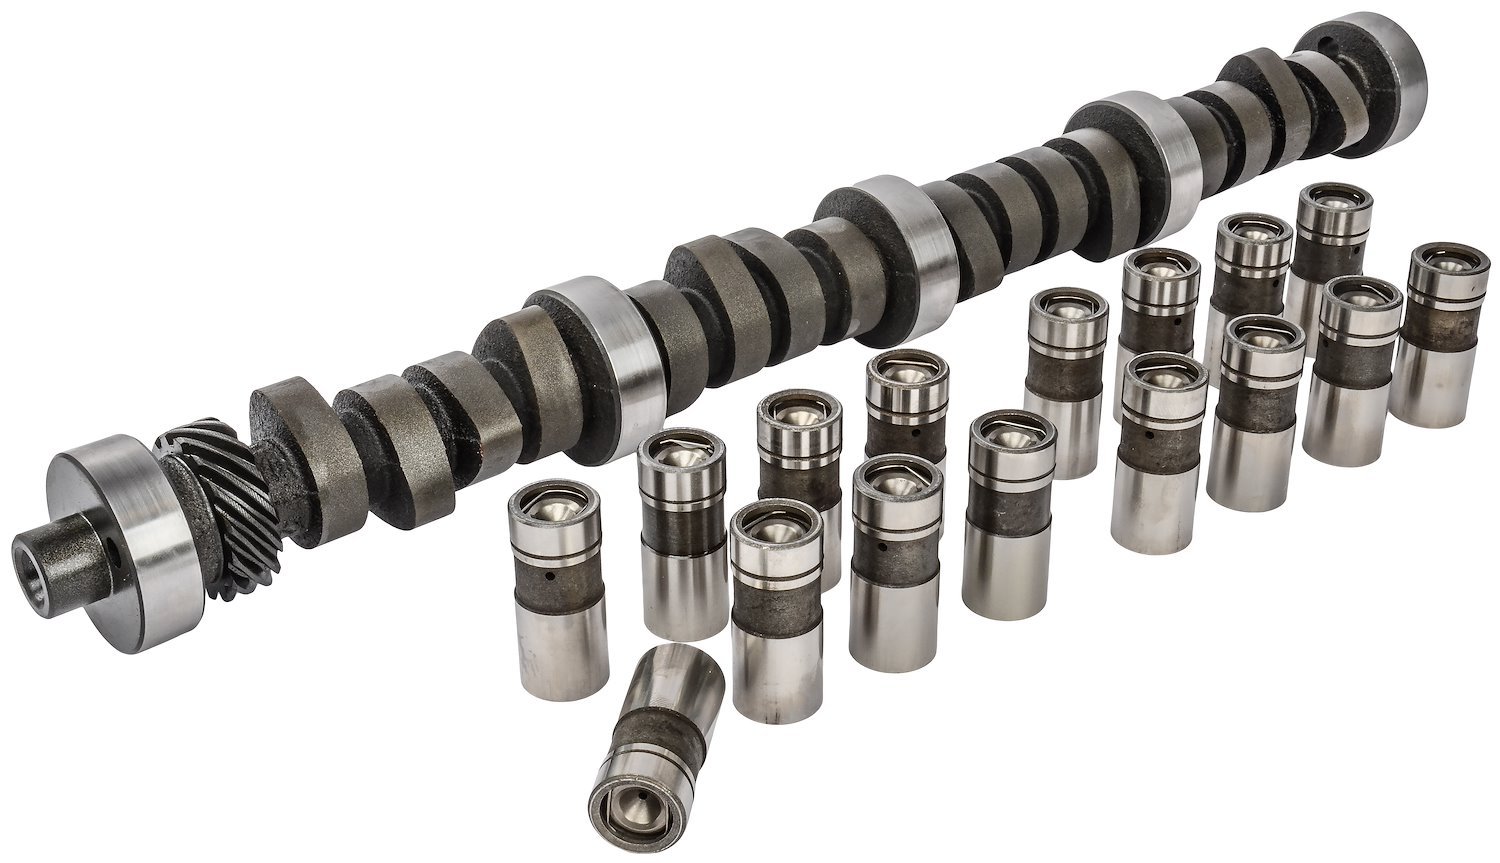 Hydraulic Flat Tappet Camshaft & Lifters for 1958-1978 Chrysler 361-440 w/ 1-Bolt Timing Set